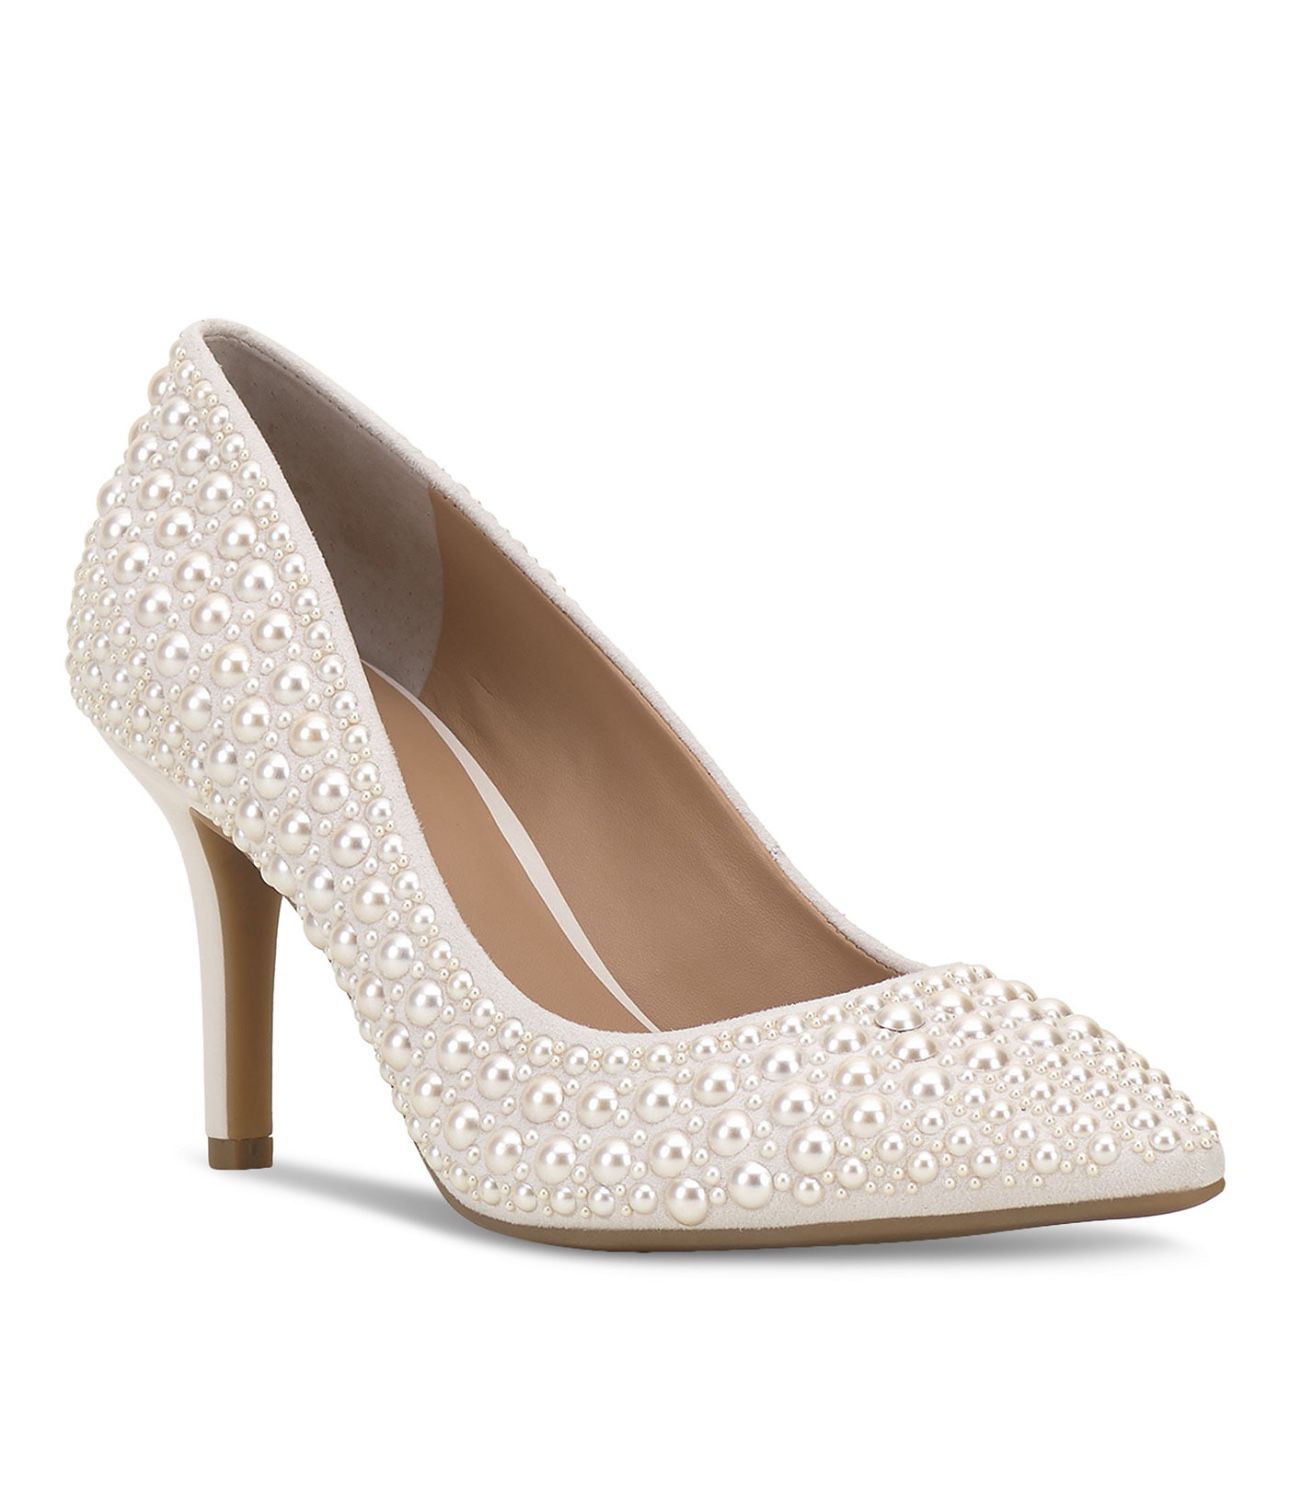 Women's Zitah Pearl Embellished Pointed Toe Pumps Size 9M